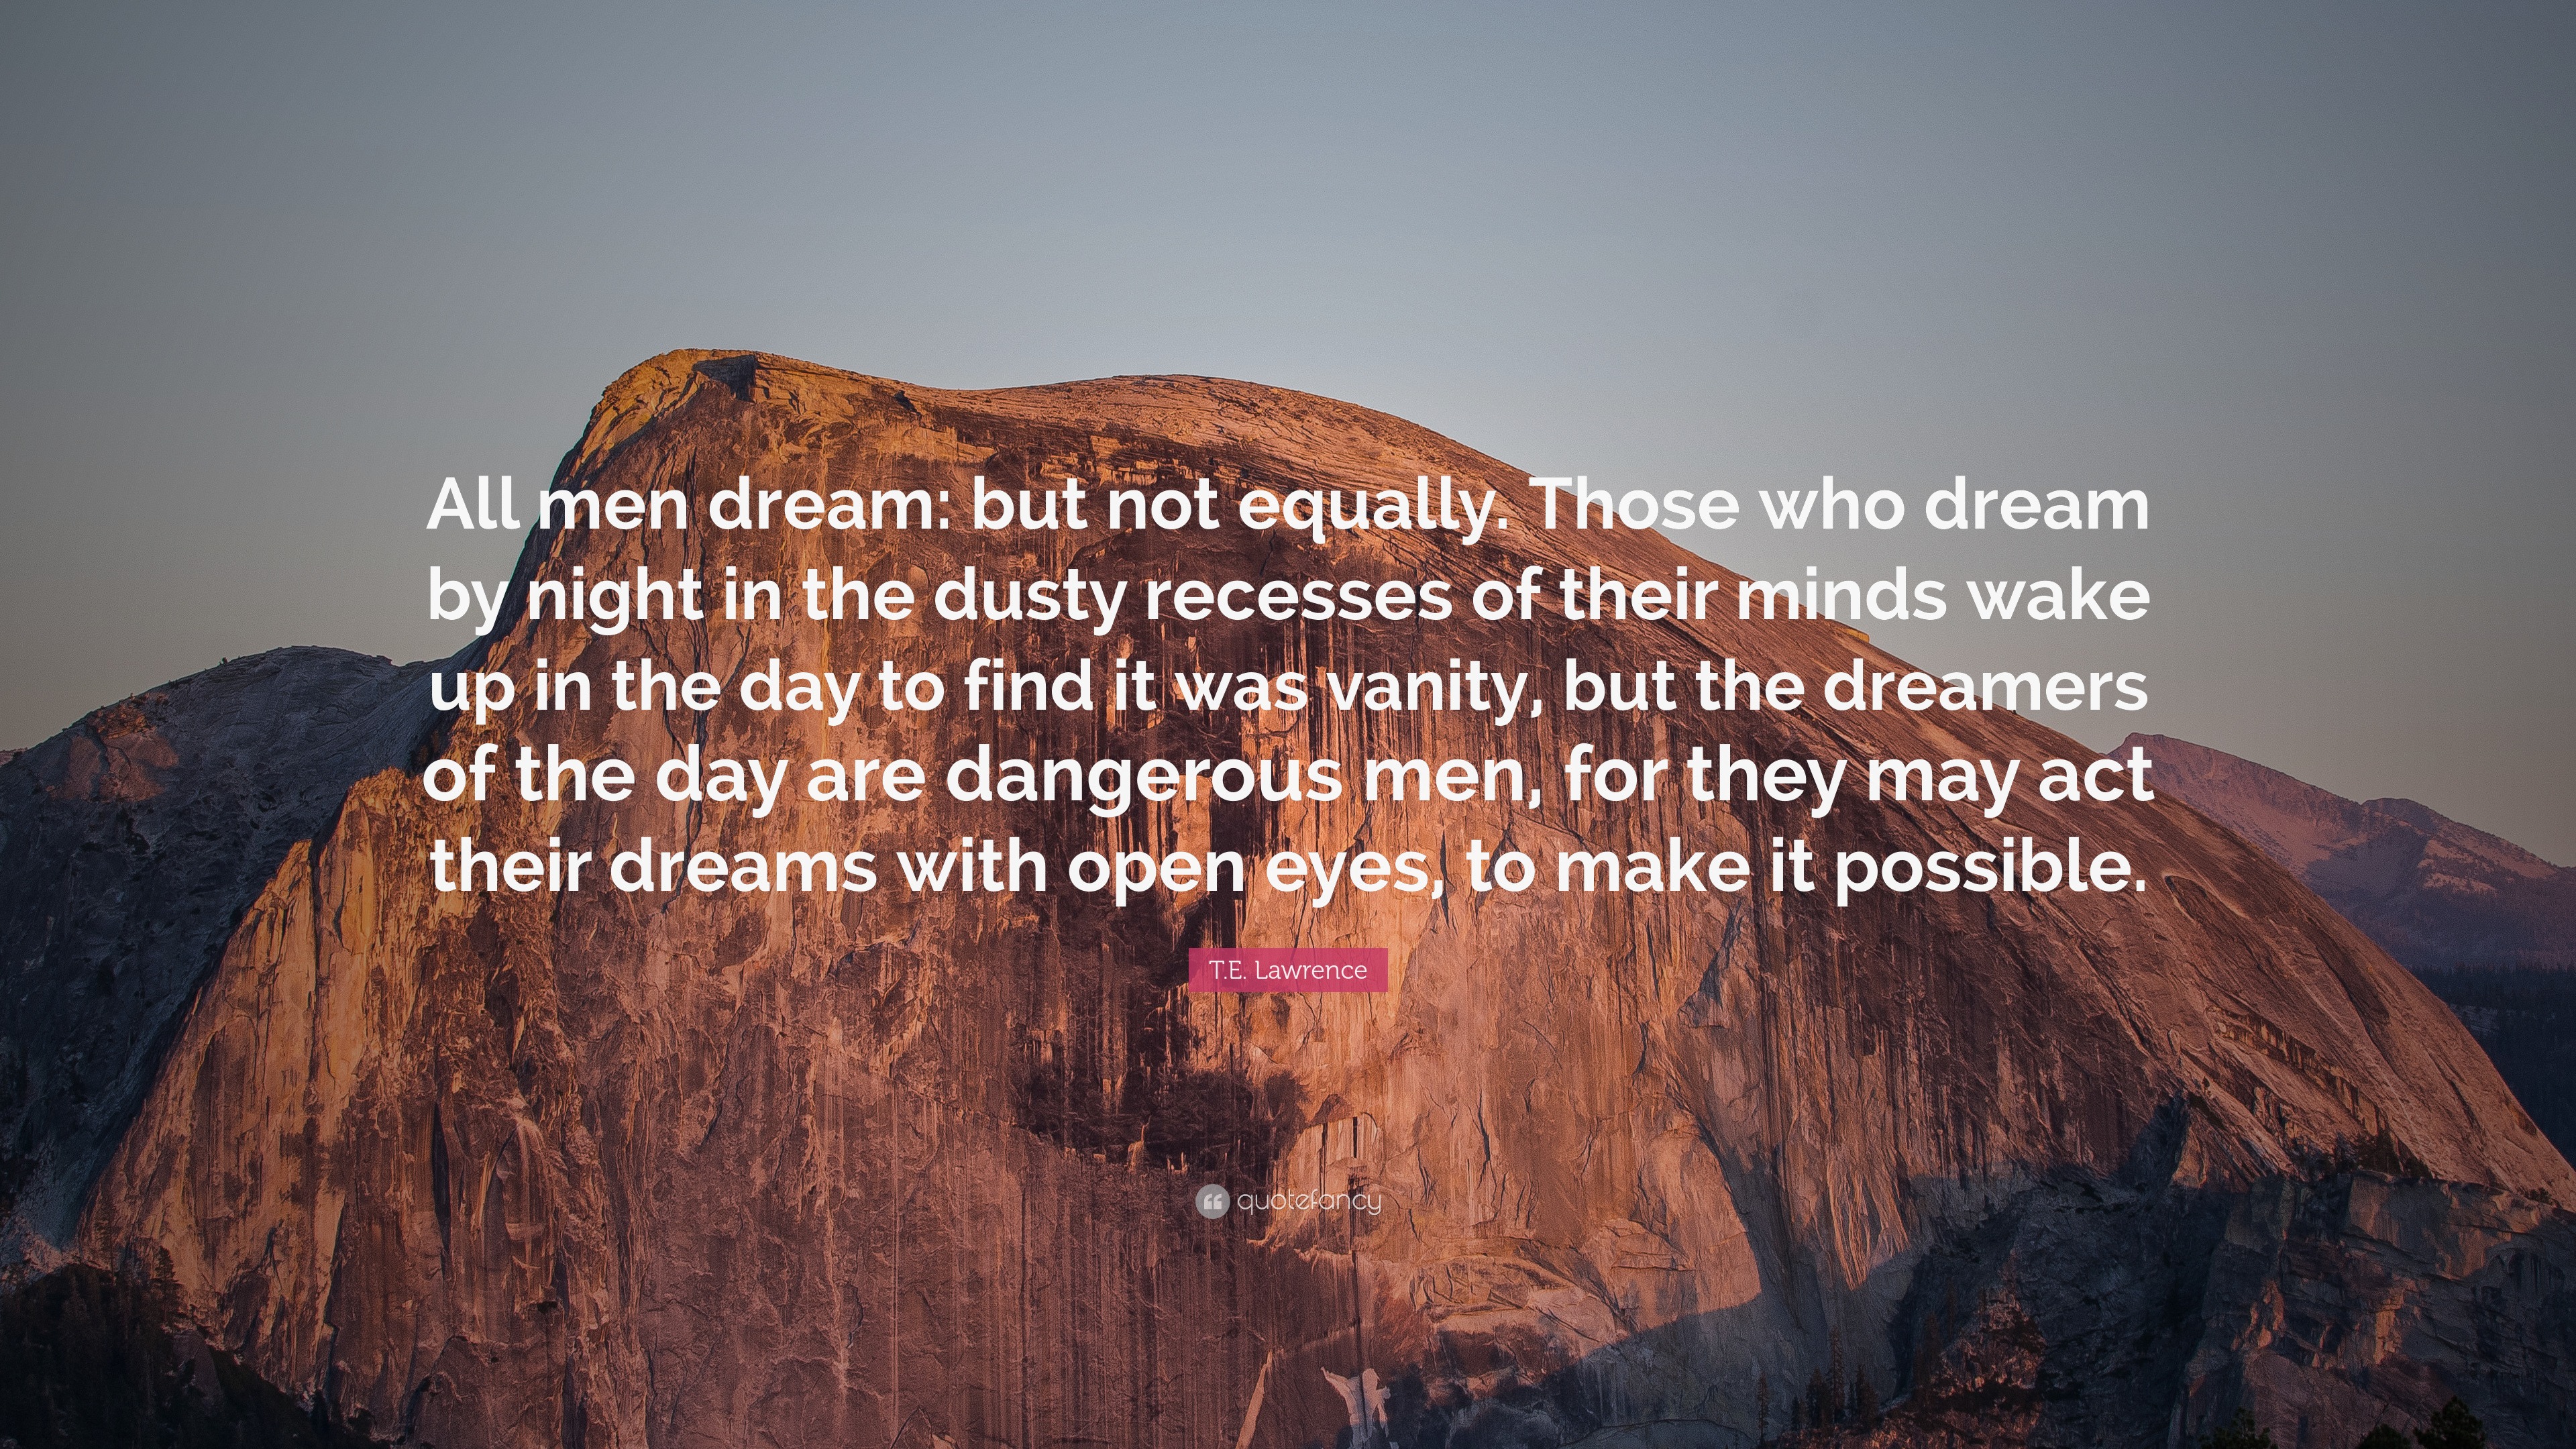 T.E. Lawrence Quote: "All men dream: but not equally ...